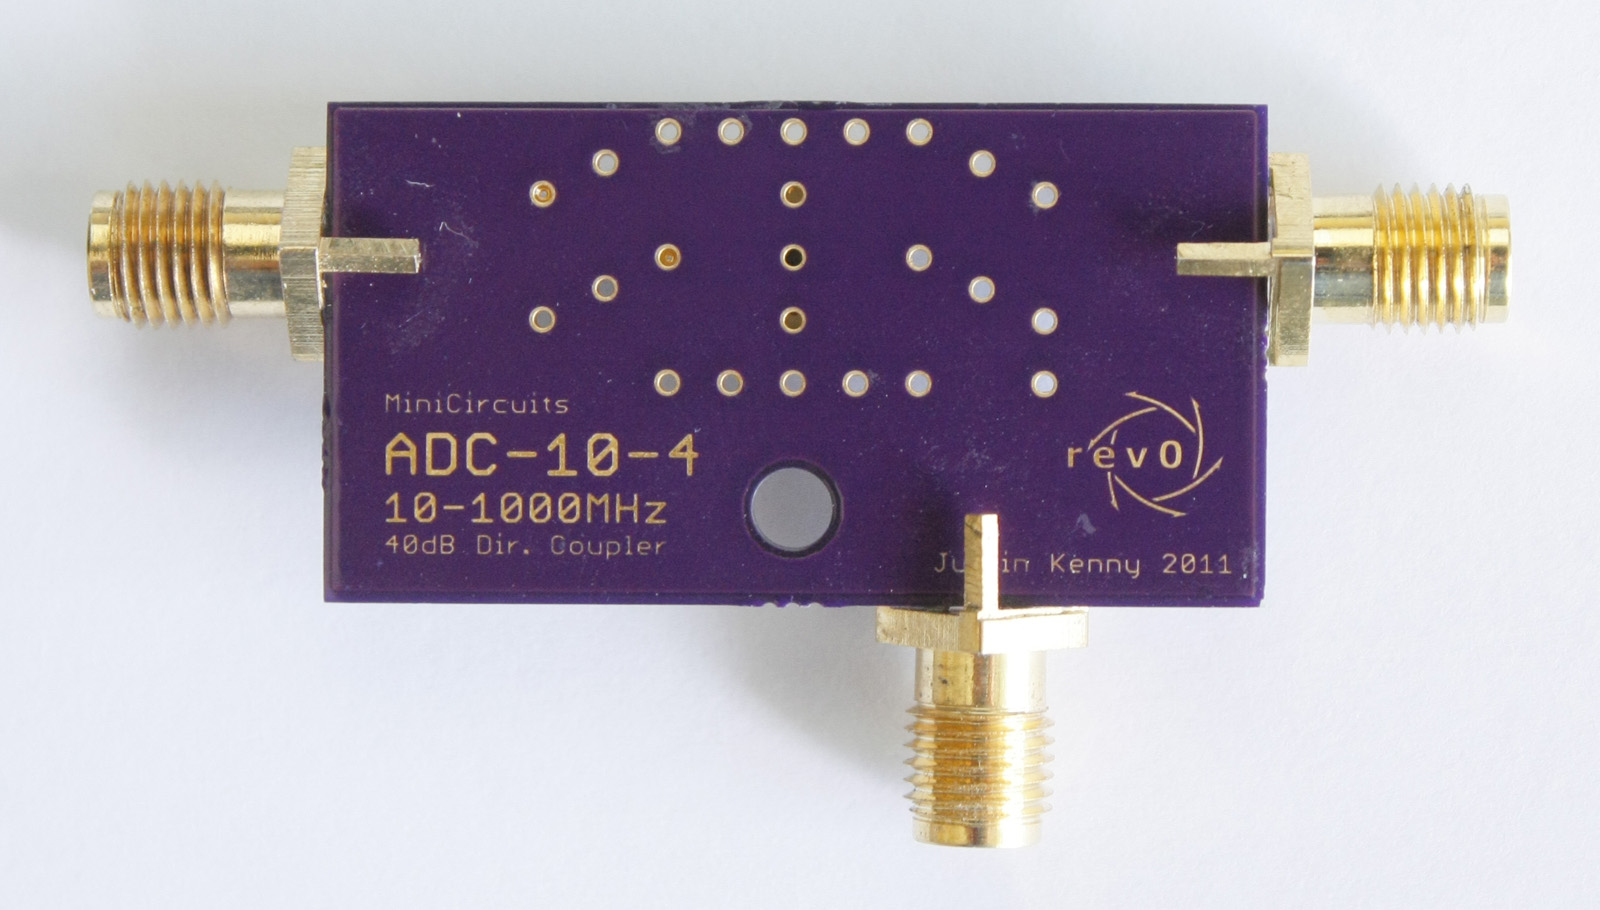 Top side of the ADC-10-4 breakout.